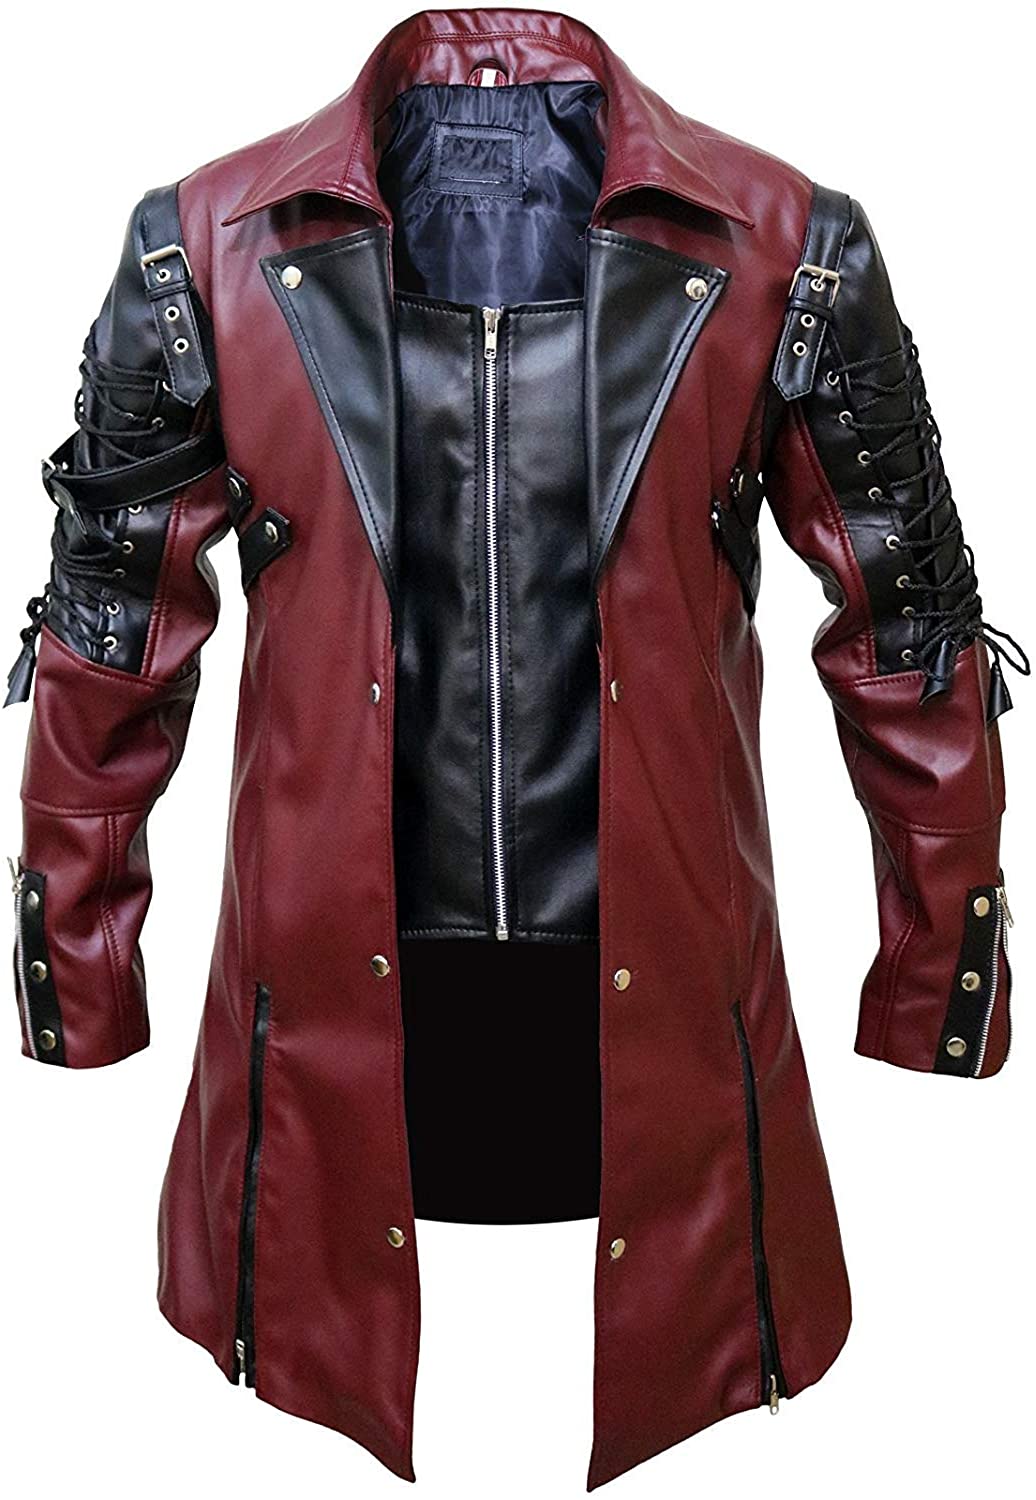 "POISON" New Leather Biker Motorcycle Jacket All sizes!